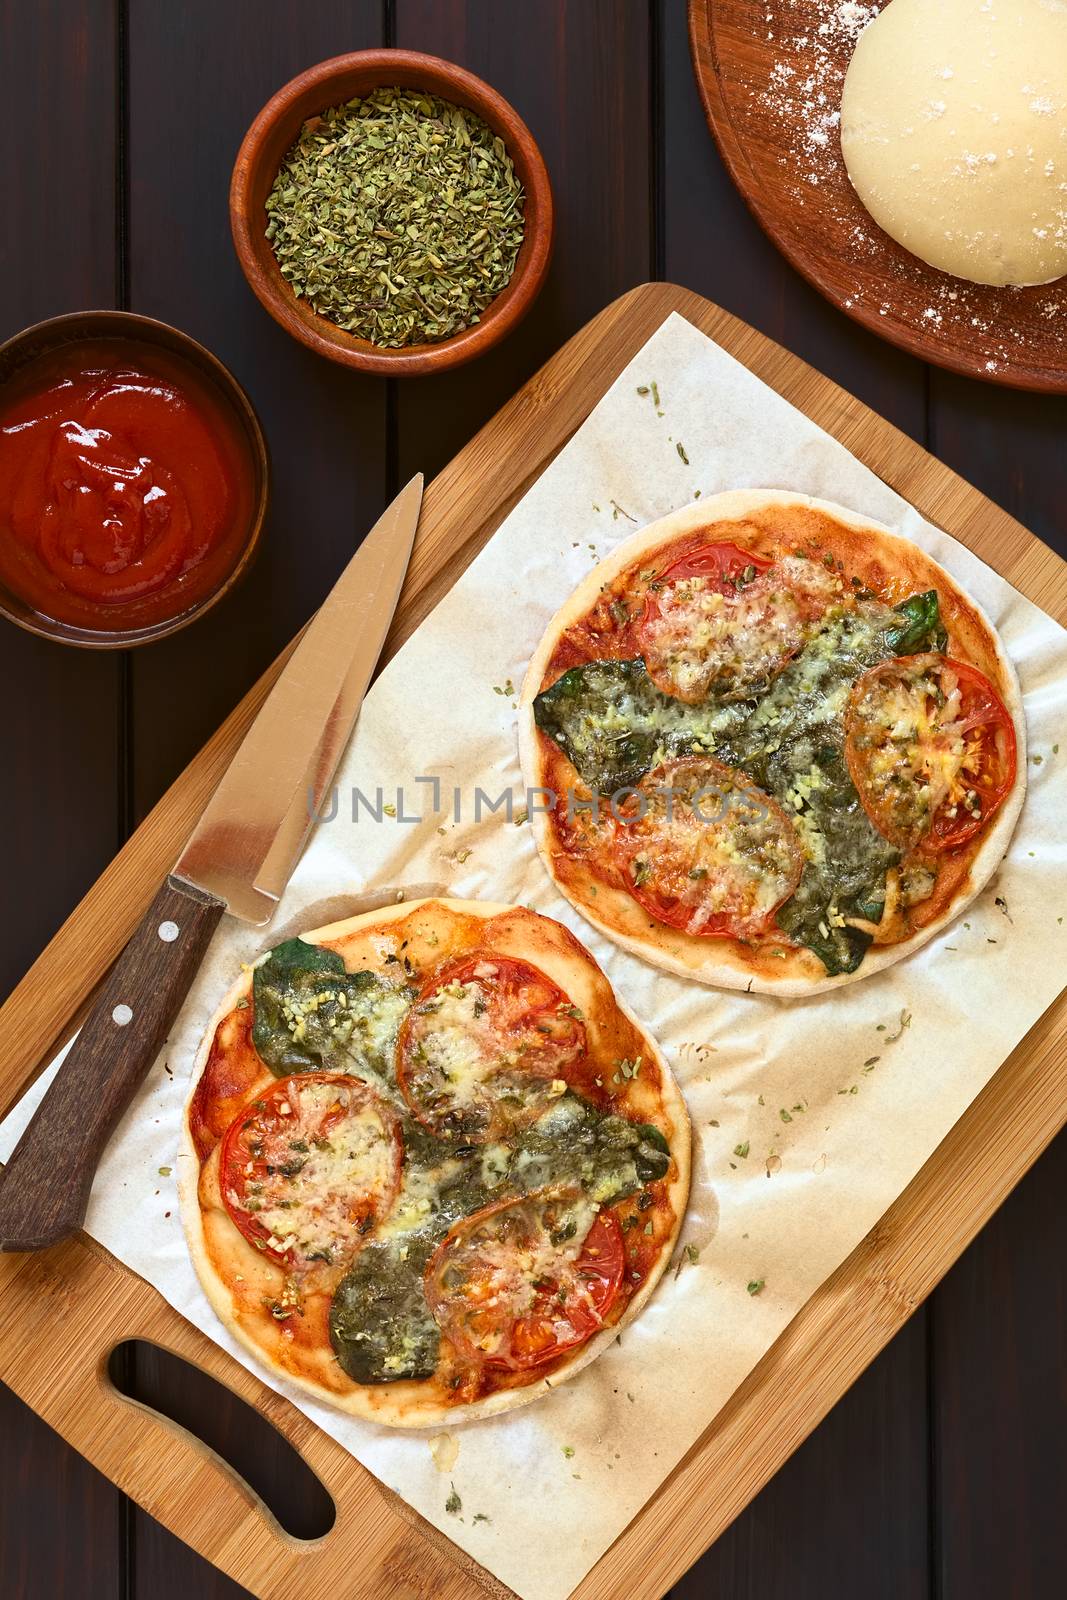 Homemade spinach and tomato pizza on baking paper on wooden board, pizza dough, dried oregano, tomato sauce on the side, photographed overhead on dark wood with natural light